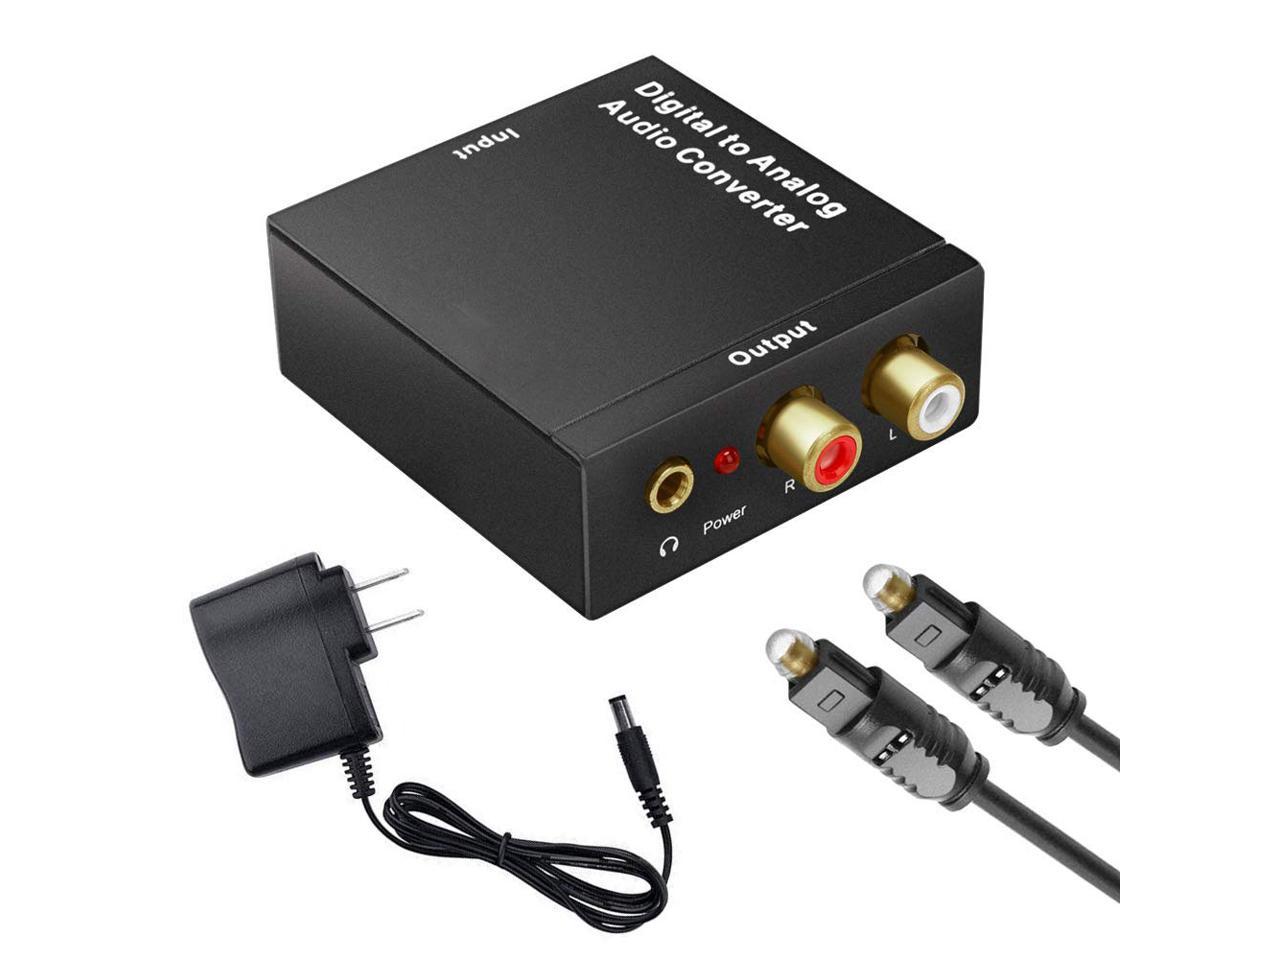 Audio Digital to Analog Converter DAC with 3.5mm Jack, Optical SPDIF  Toslink Coaxial to Analog Stereo L/ R Converter Adapter with Optical Cable  and 